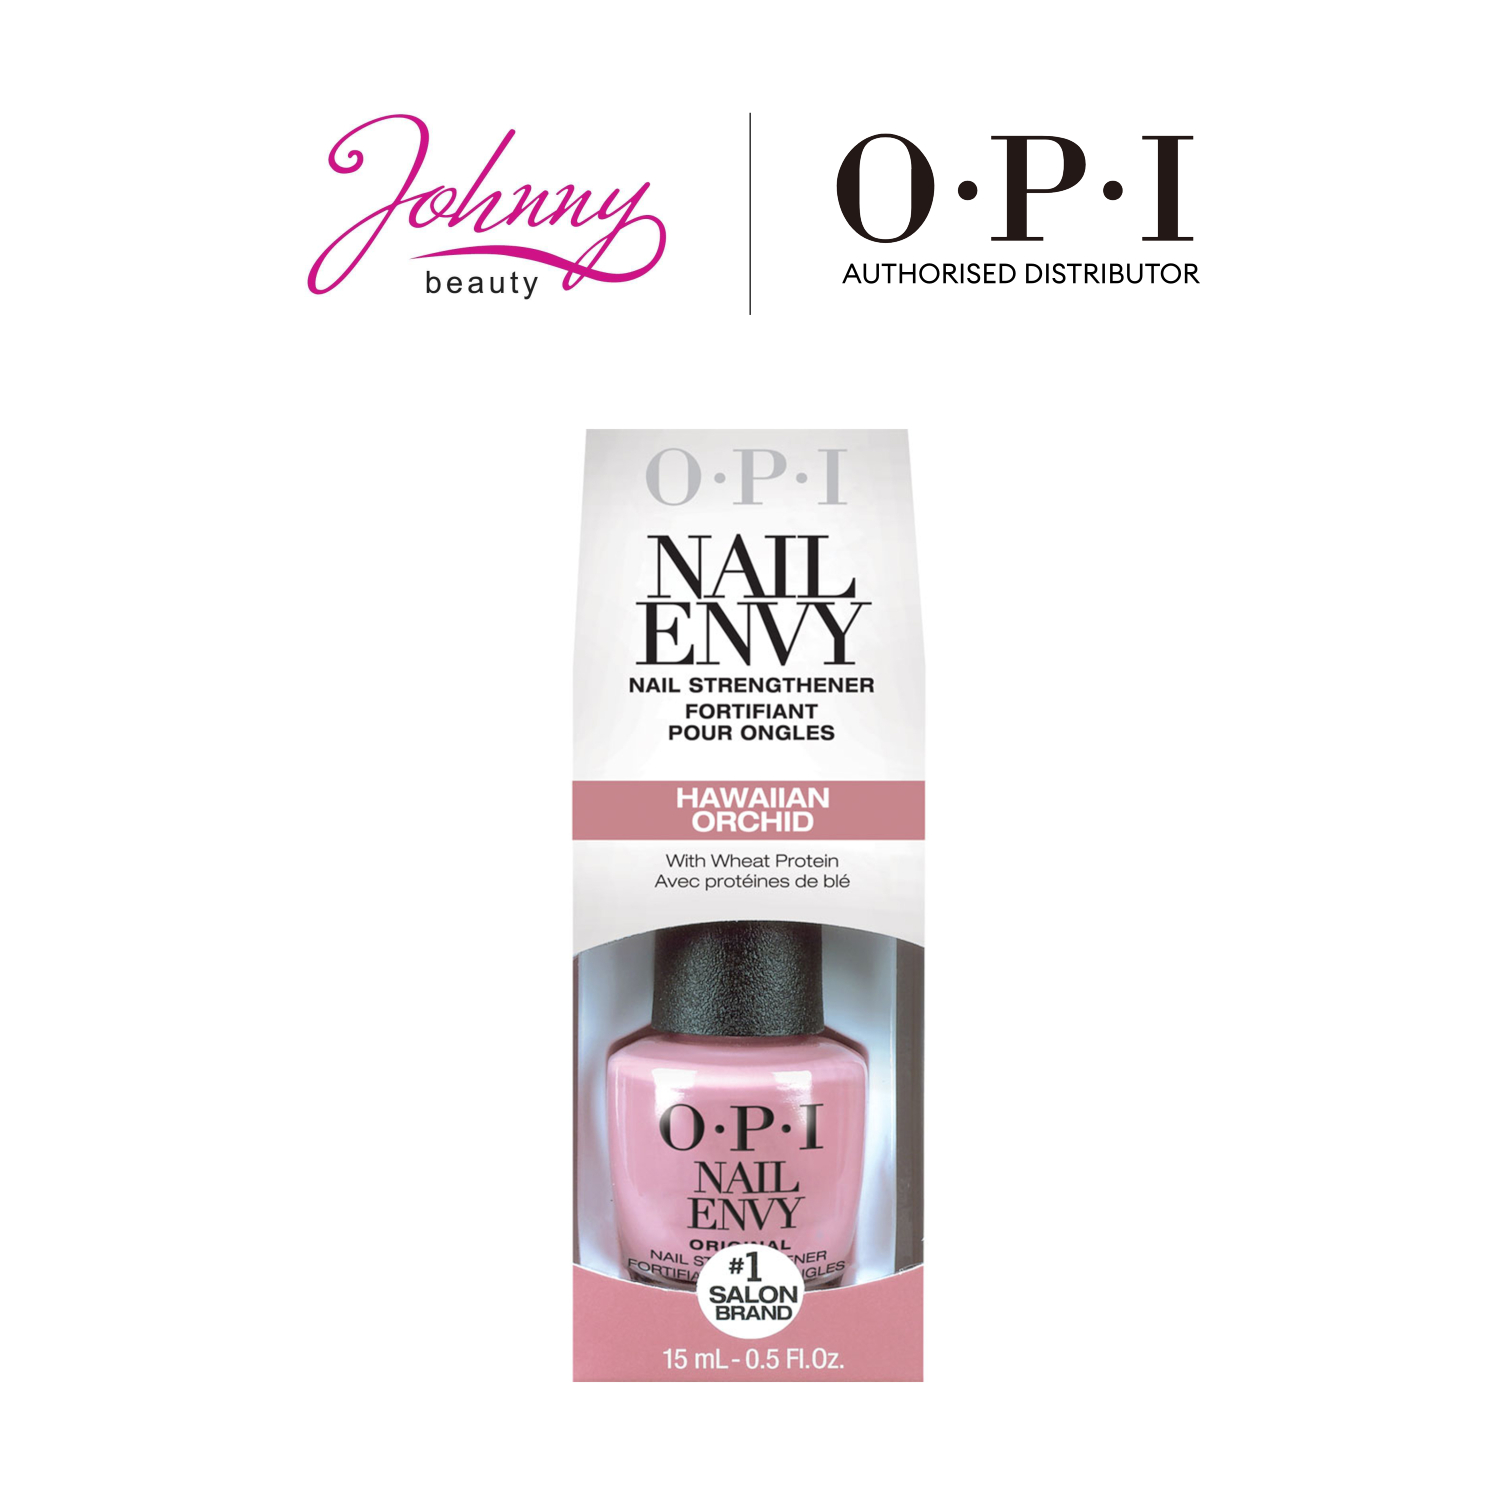 Why We Buy OPI (Hint: OPI Makes a Great Green, Healthy, Non-Toxic Nail- Polish) - Complexions Spa for Beauty & Wellness